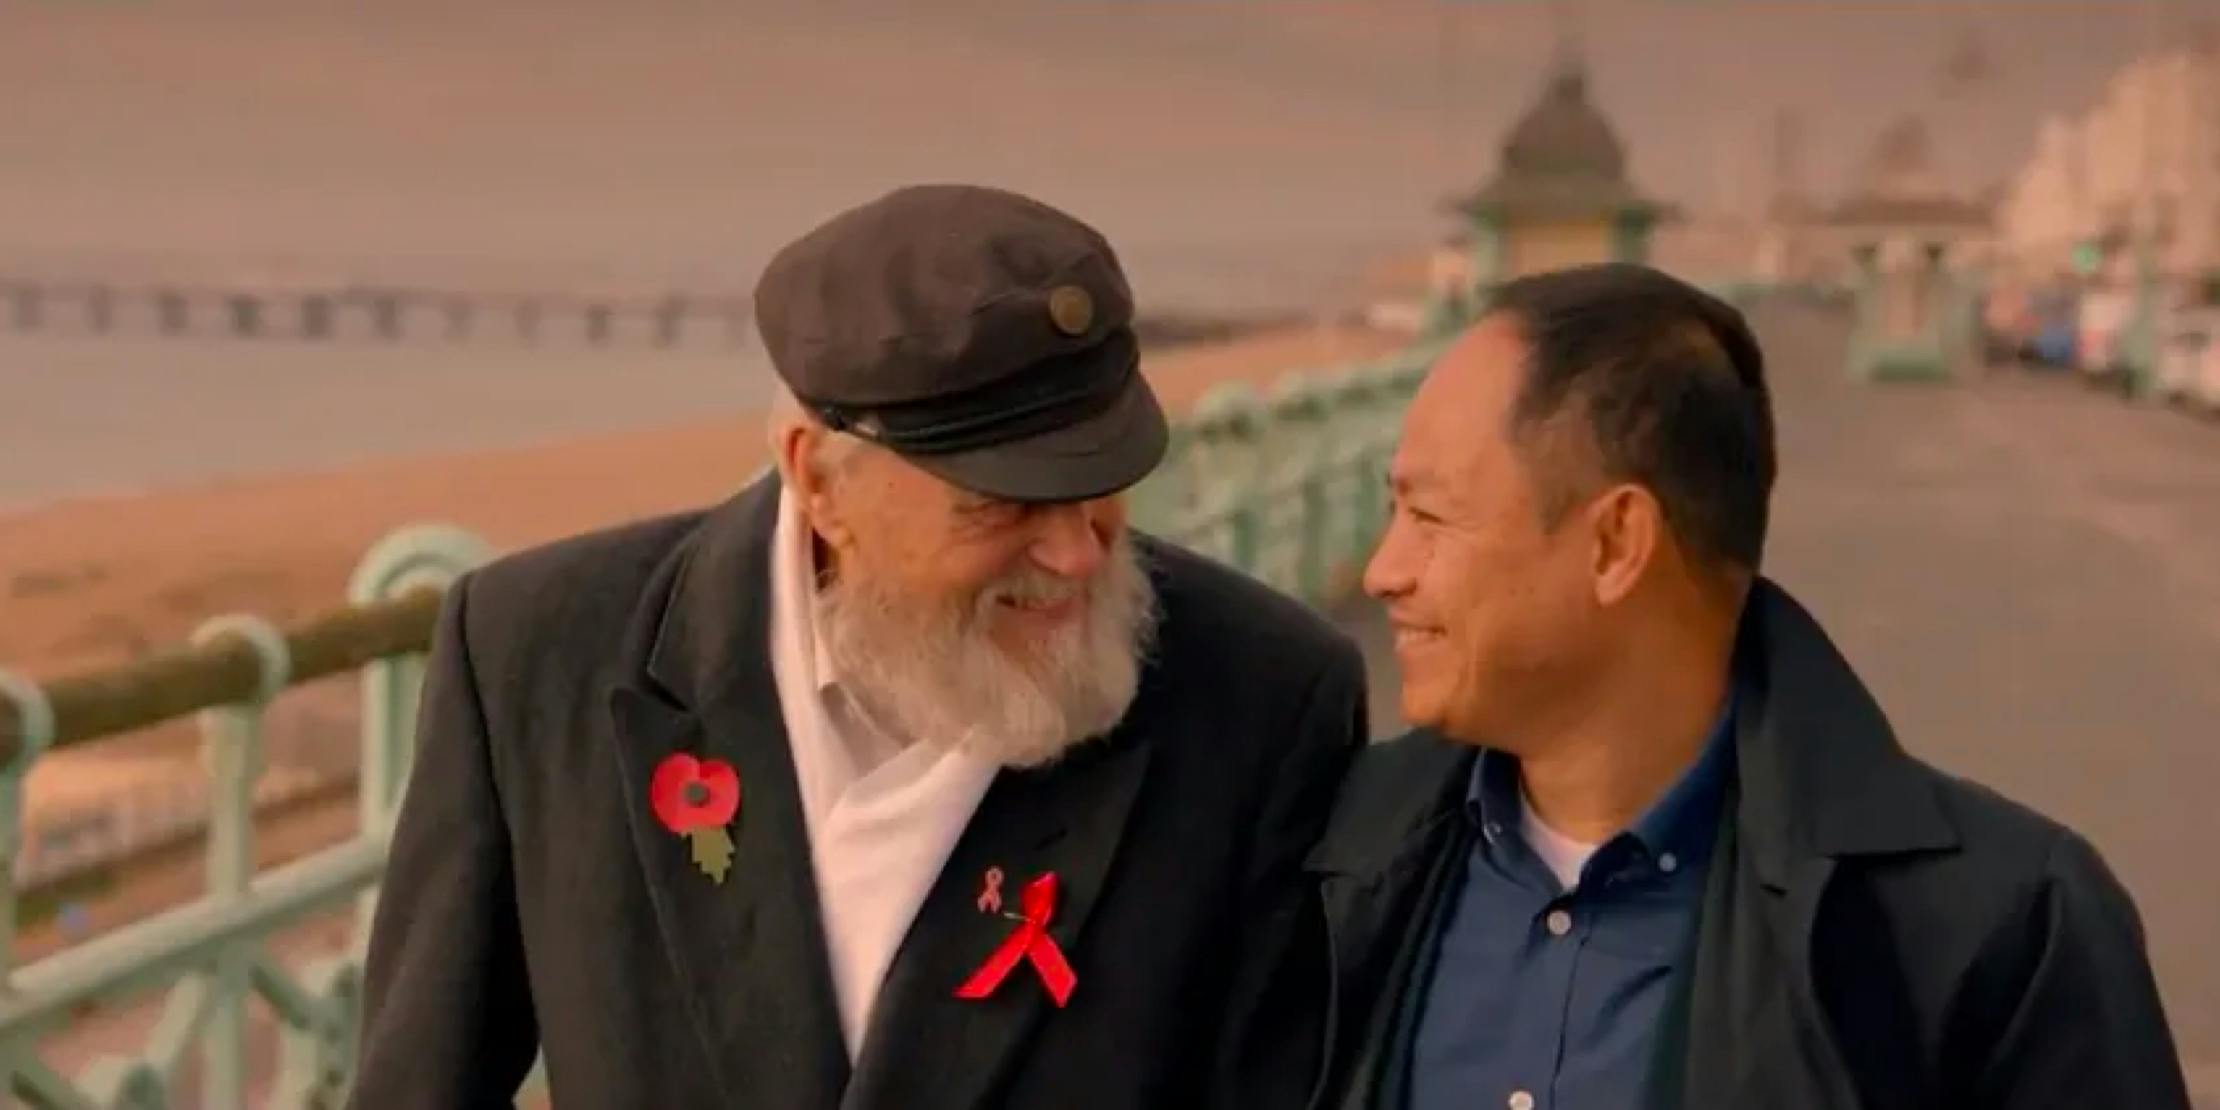 Two men looking at each other and smiling